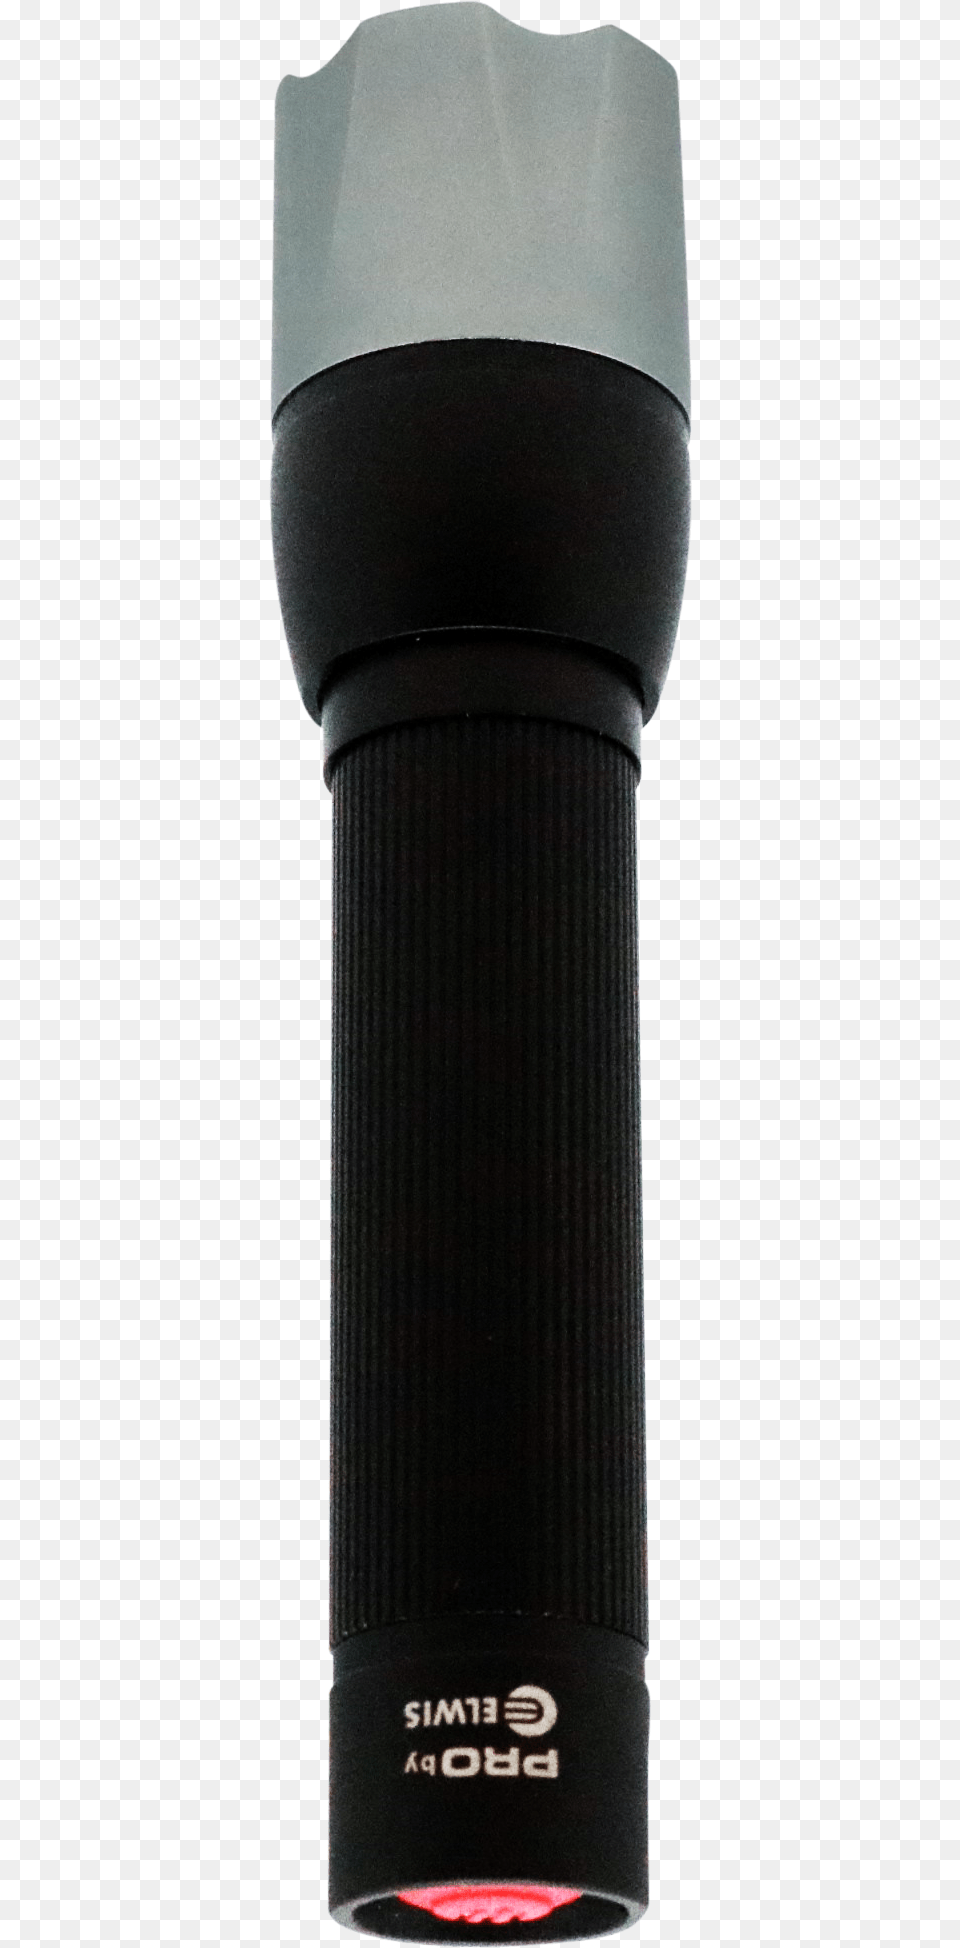 Rechargeable Handy Flashlight Of Very Good Quality Optical Instrument, Electronics, Camera Lens Png Image